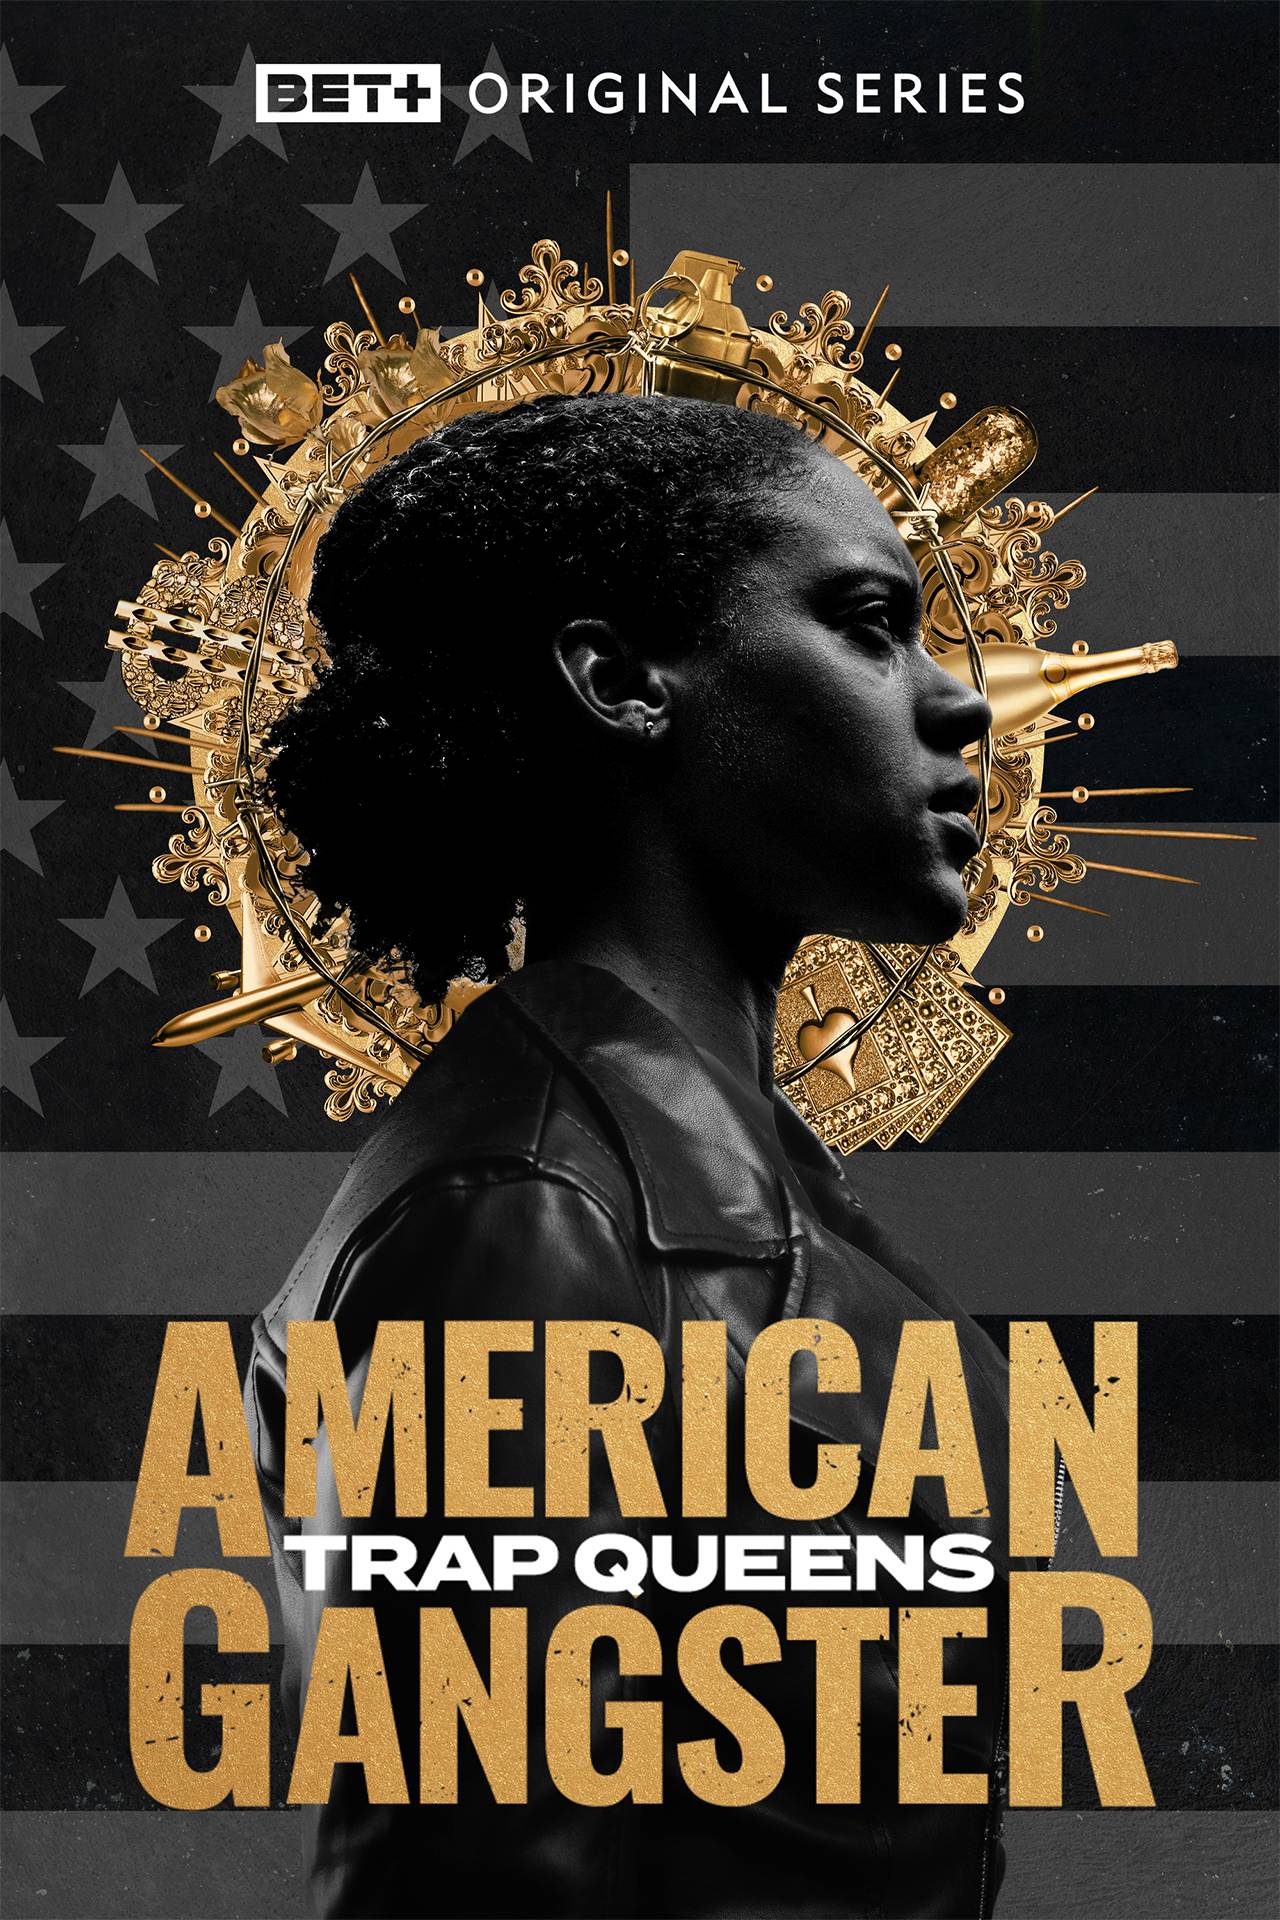 TV ratings for American Gangster: Trap Queens in Thailand. bet+ TV series